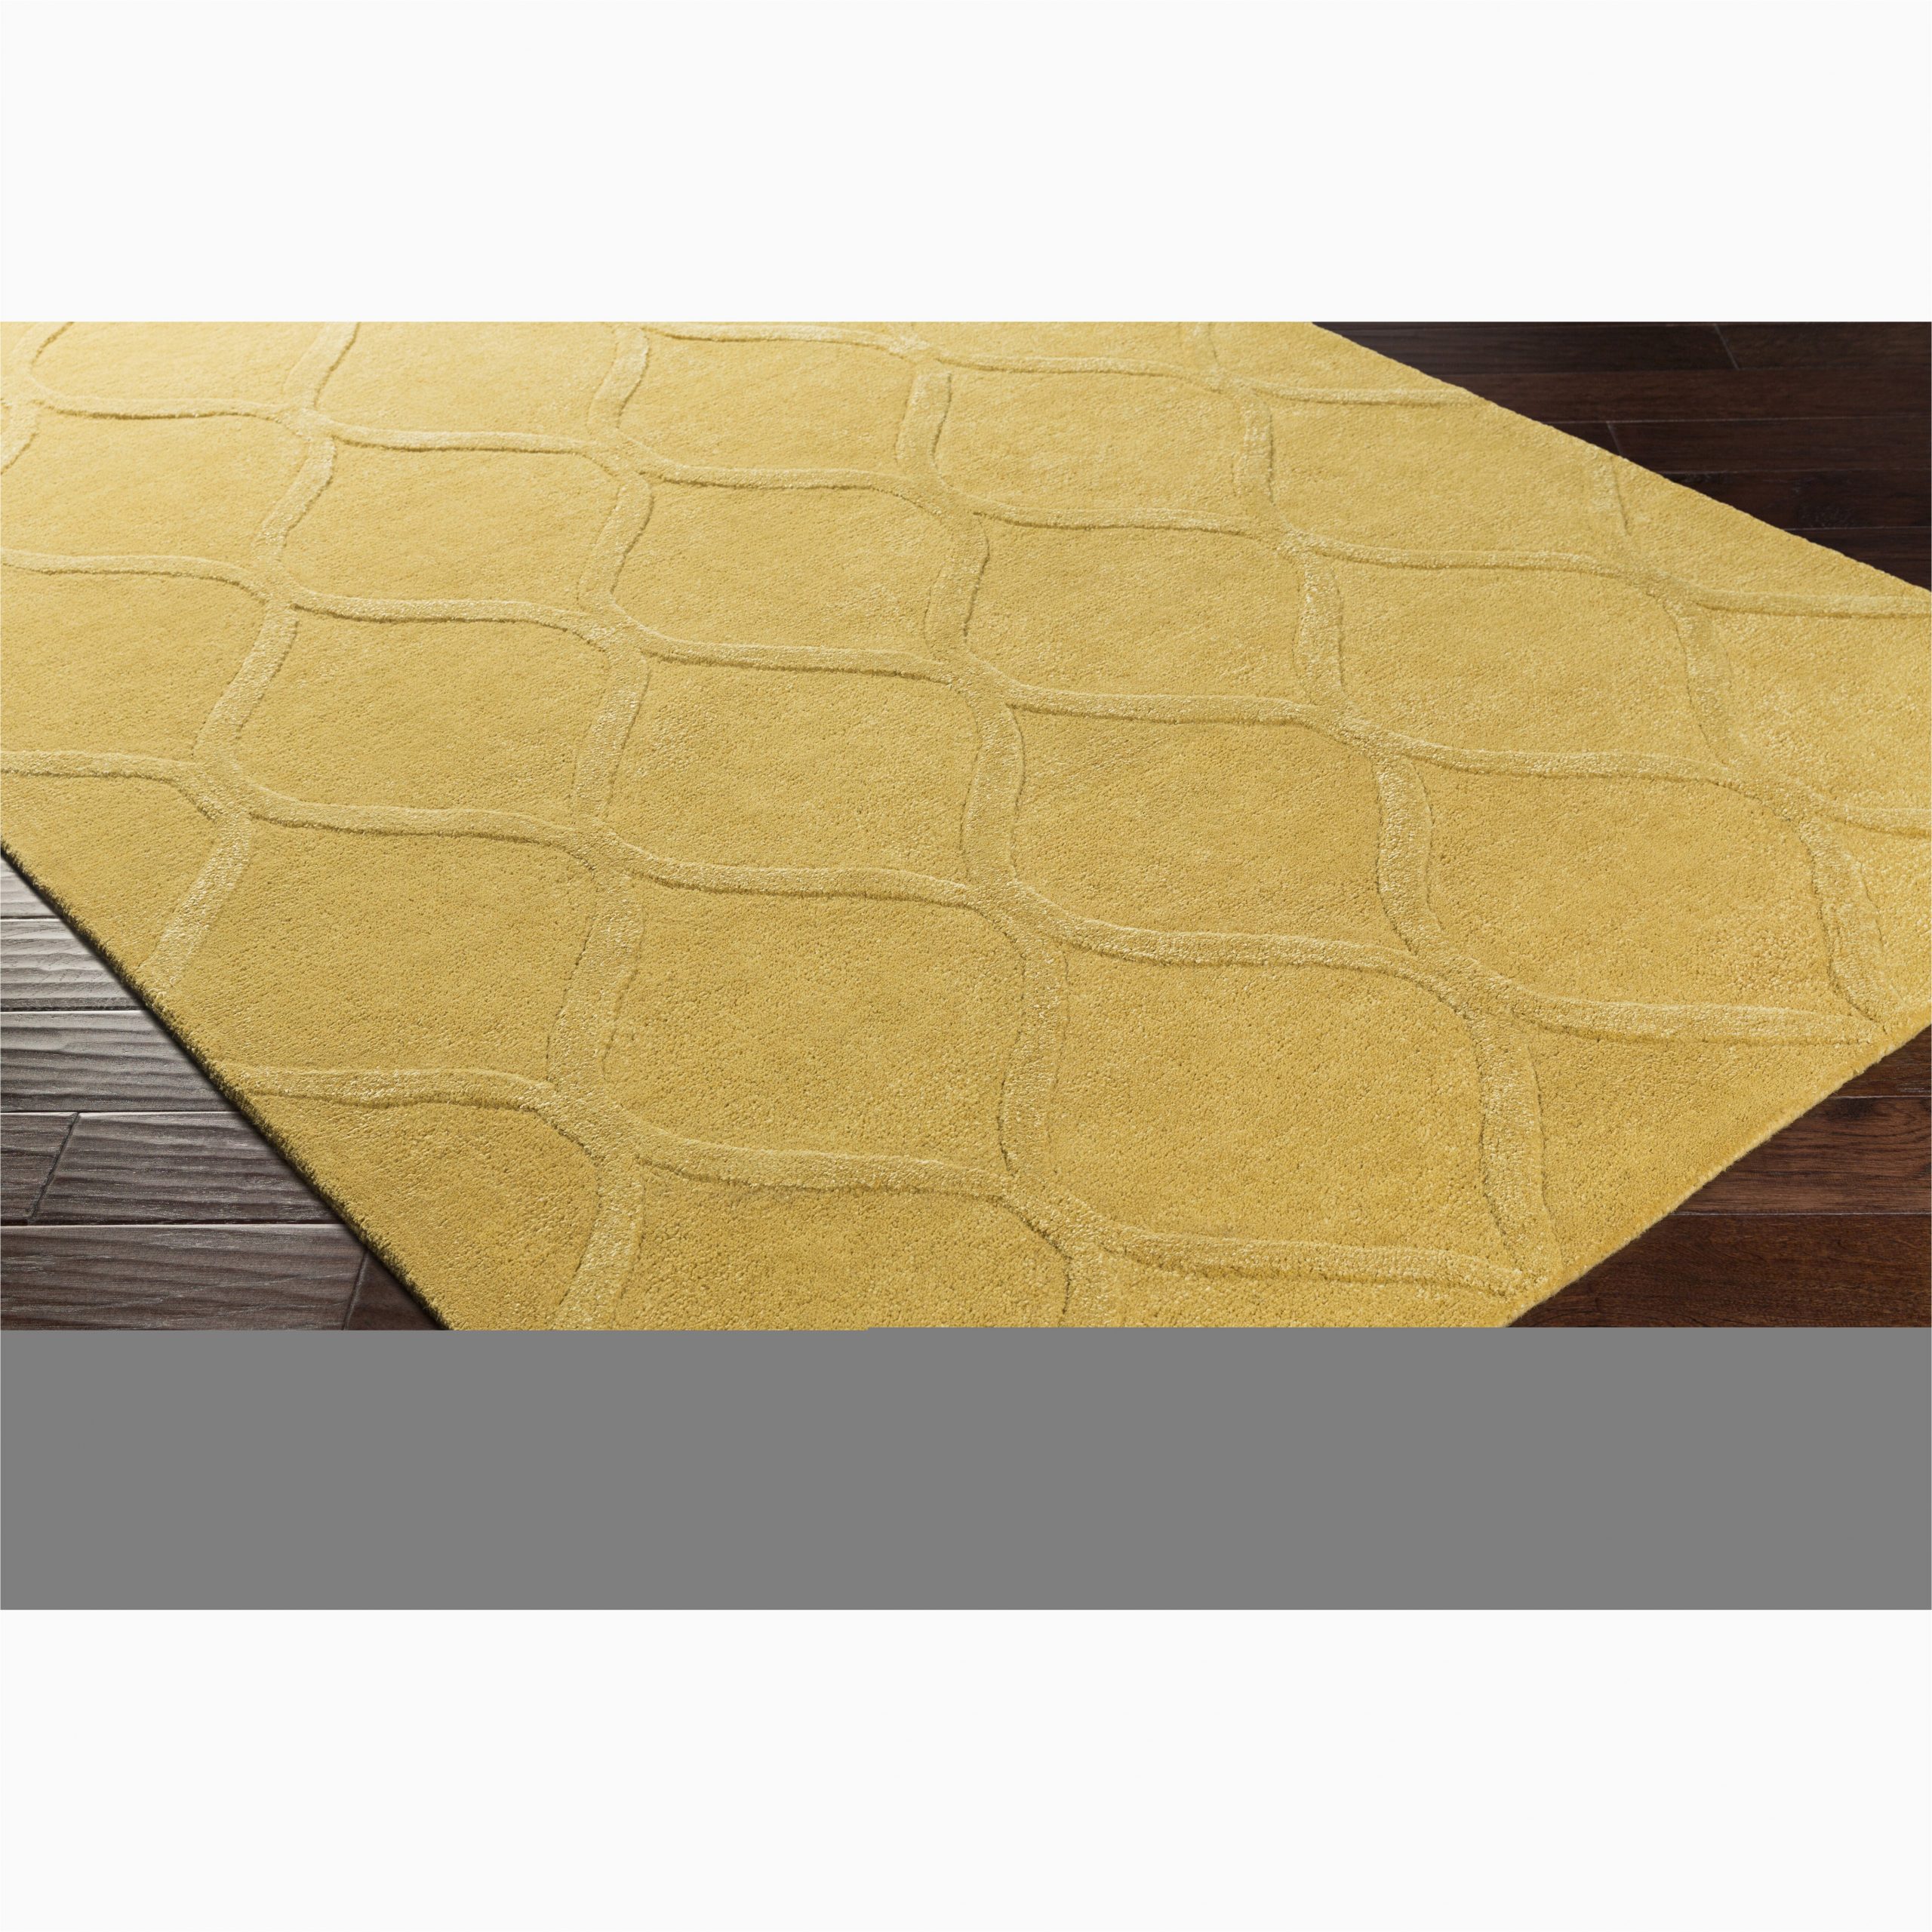 Cassidy Hand Tufted area Rug Artistic Weavers Urban Cassidy Hand Tufted Gold area Rug